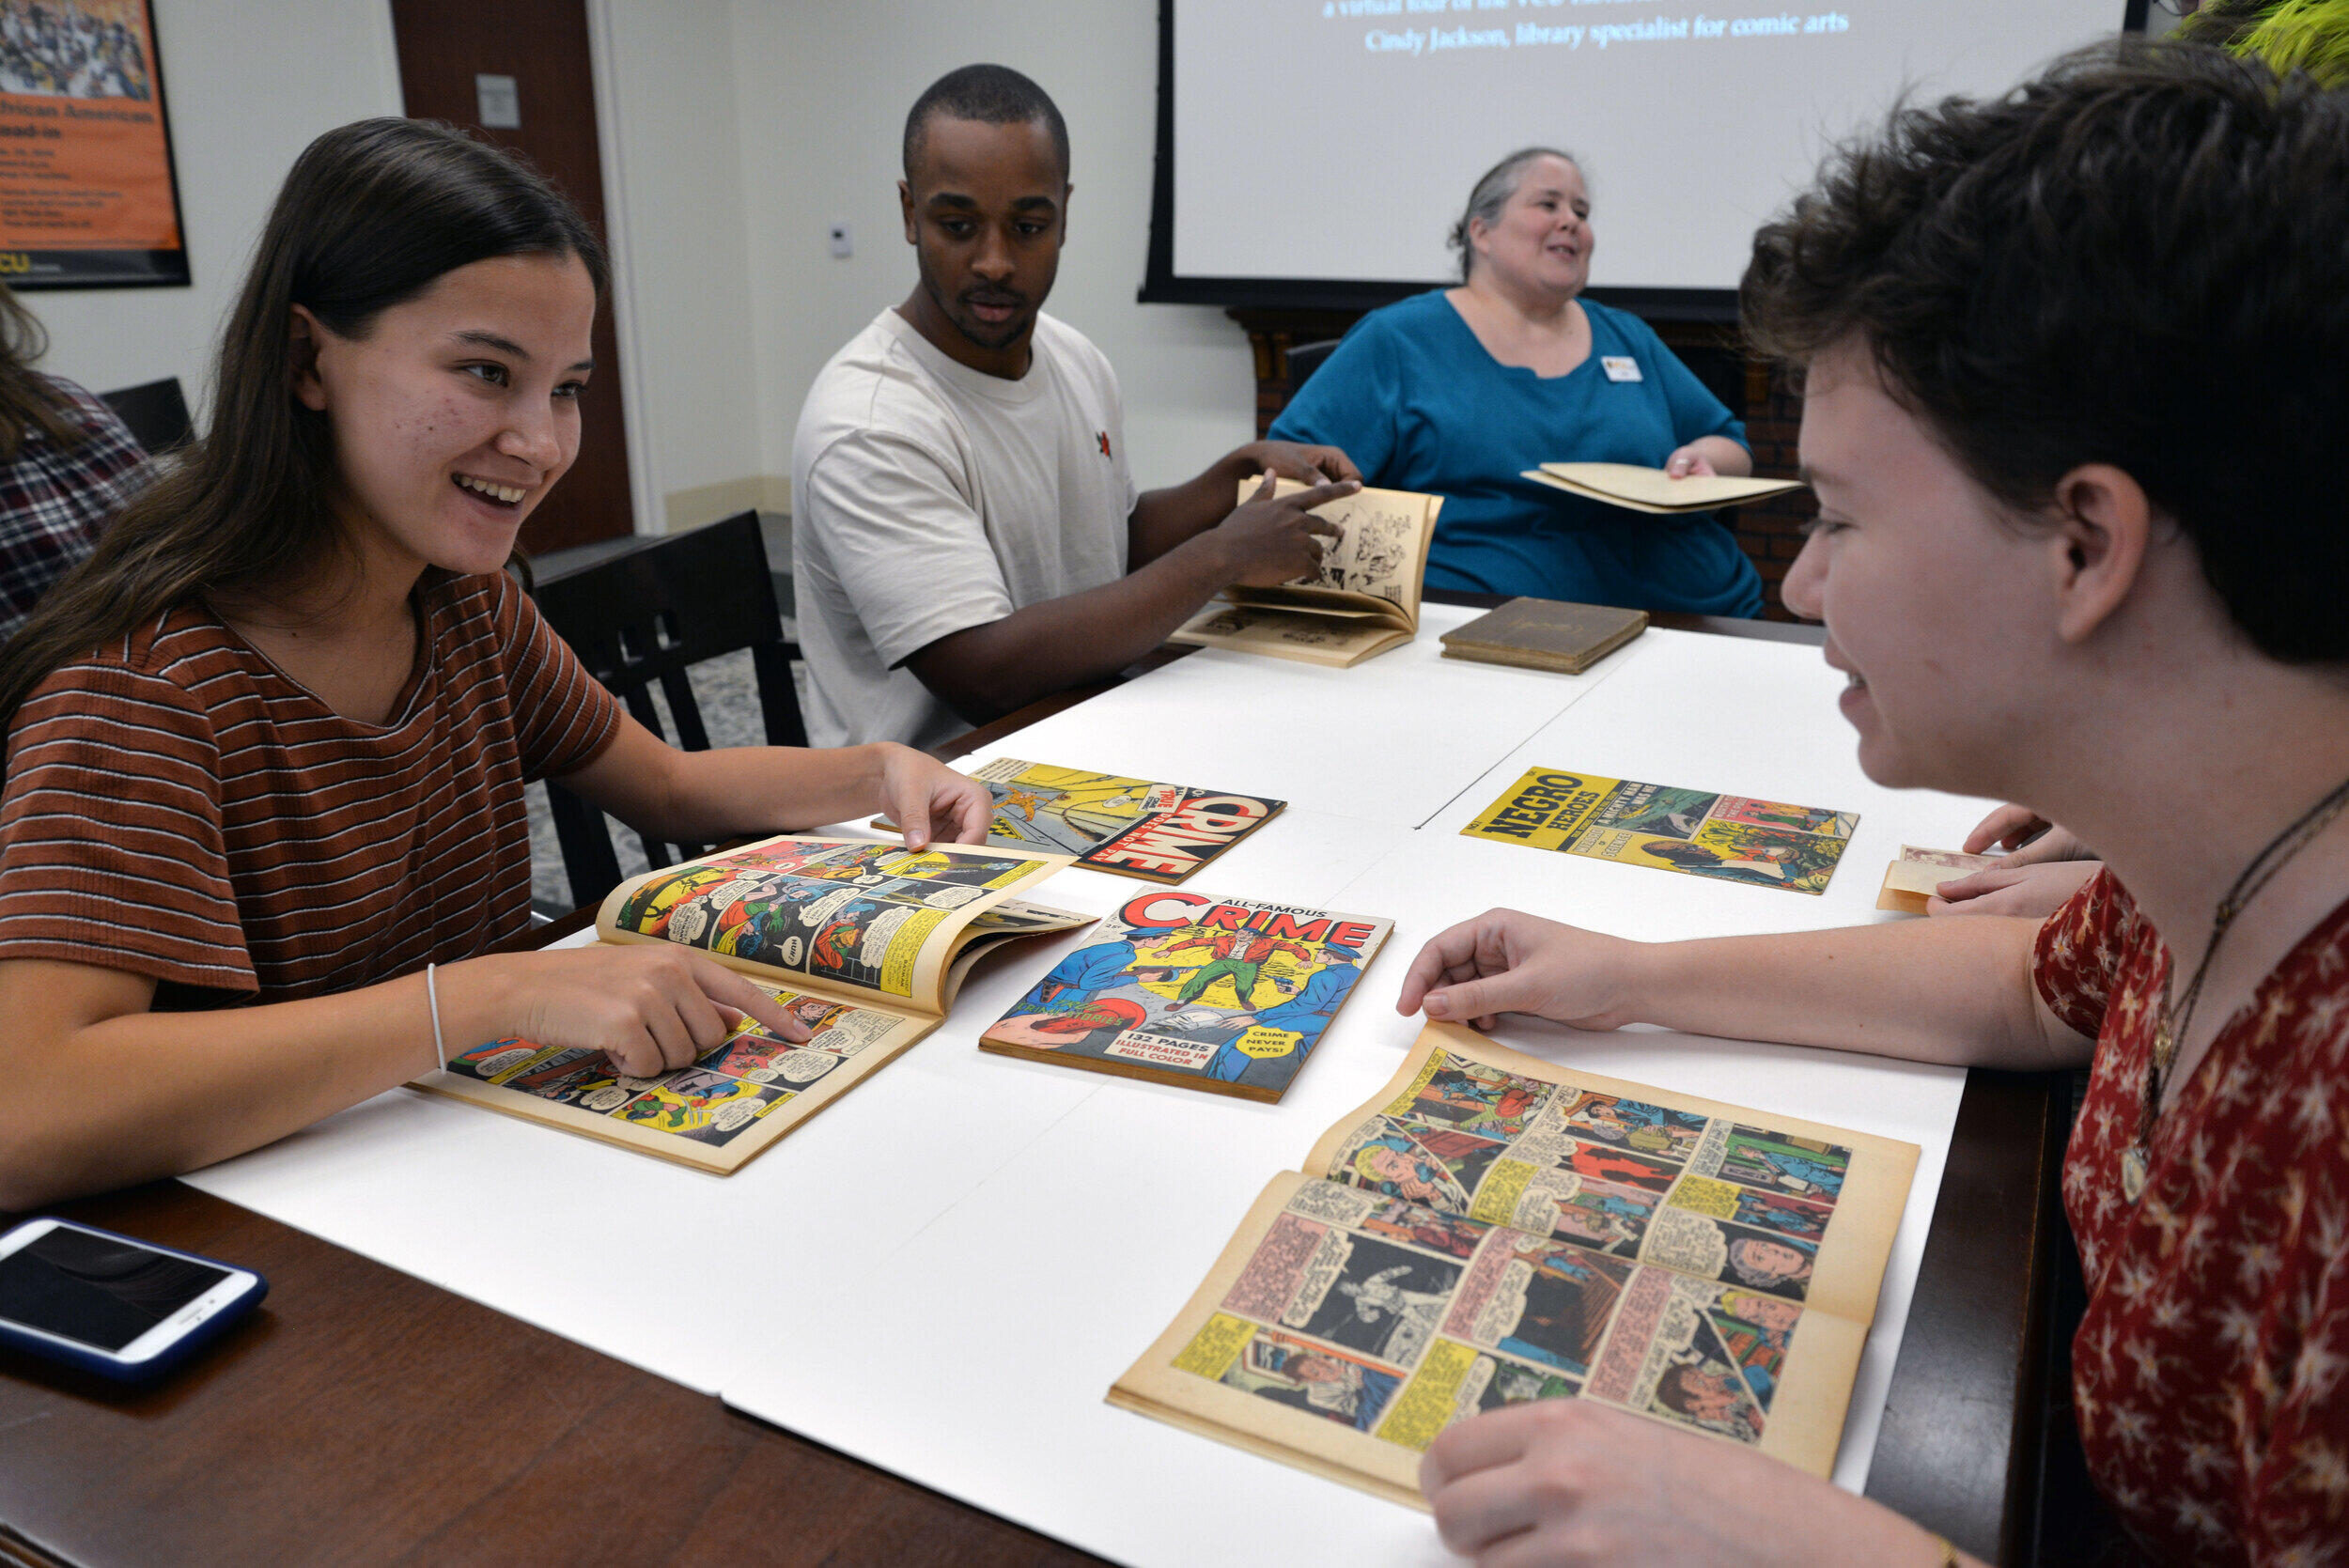 Three students seated at a table reading comic books.